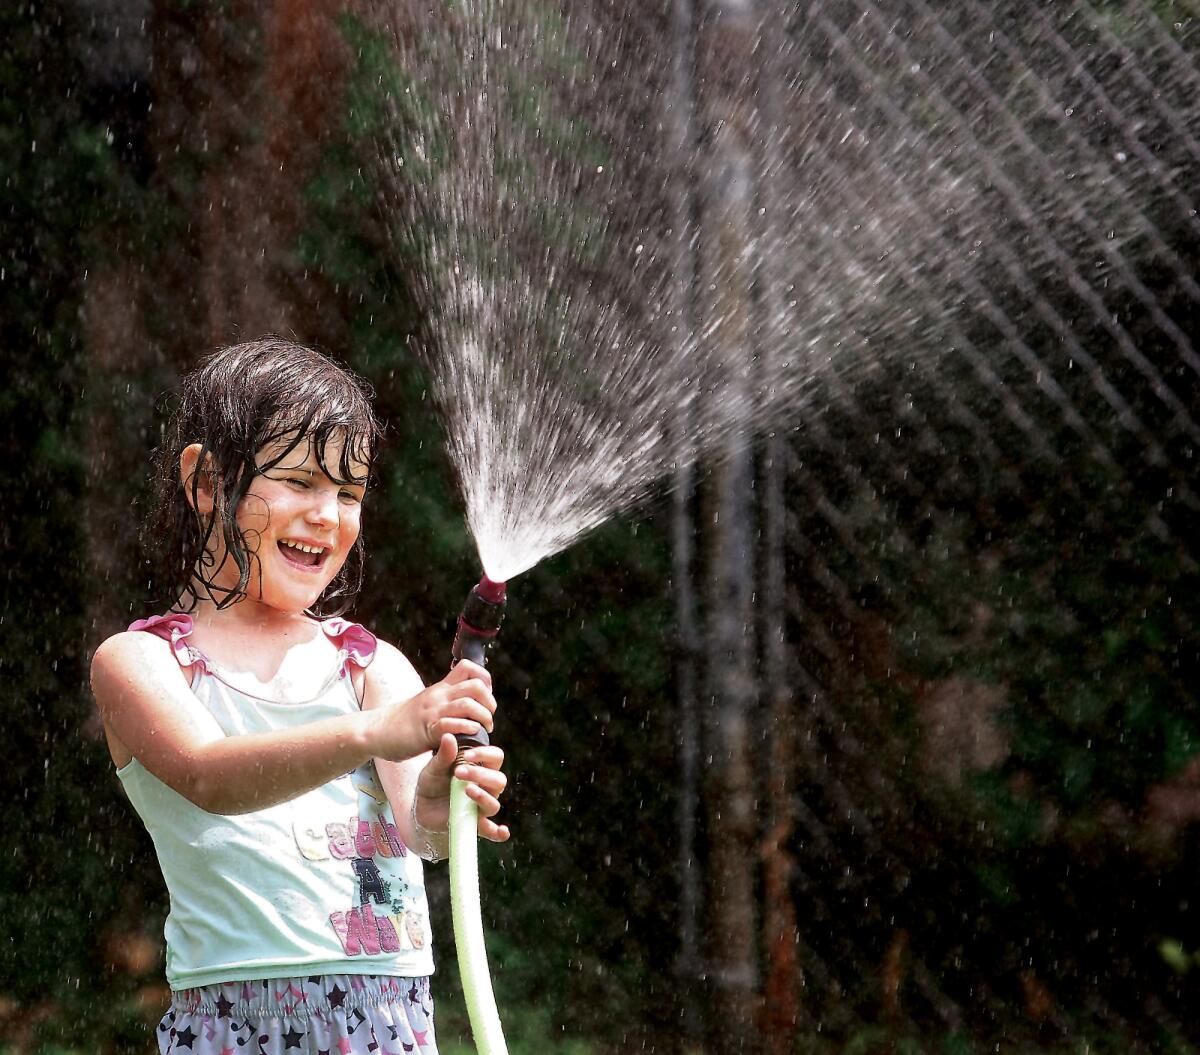 Five-year-old Claire Hayes knew how to beat the heat as she played with the garden hose in her front yard in Alton, Ill.